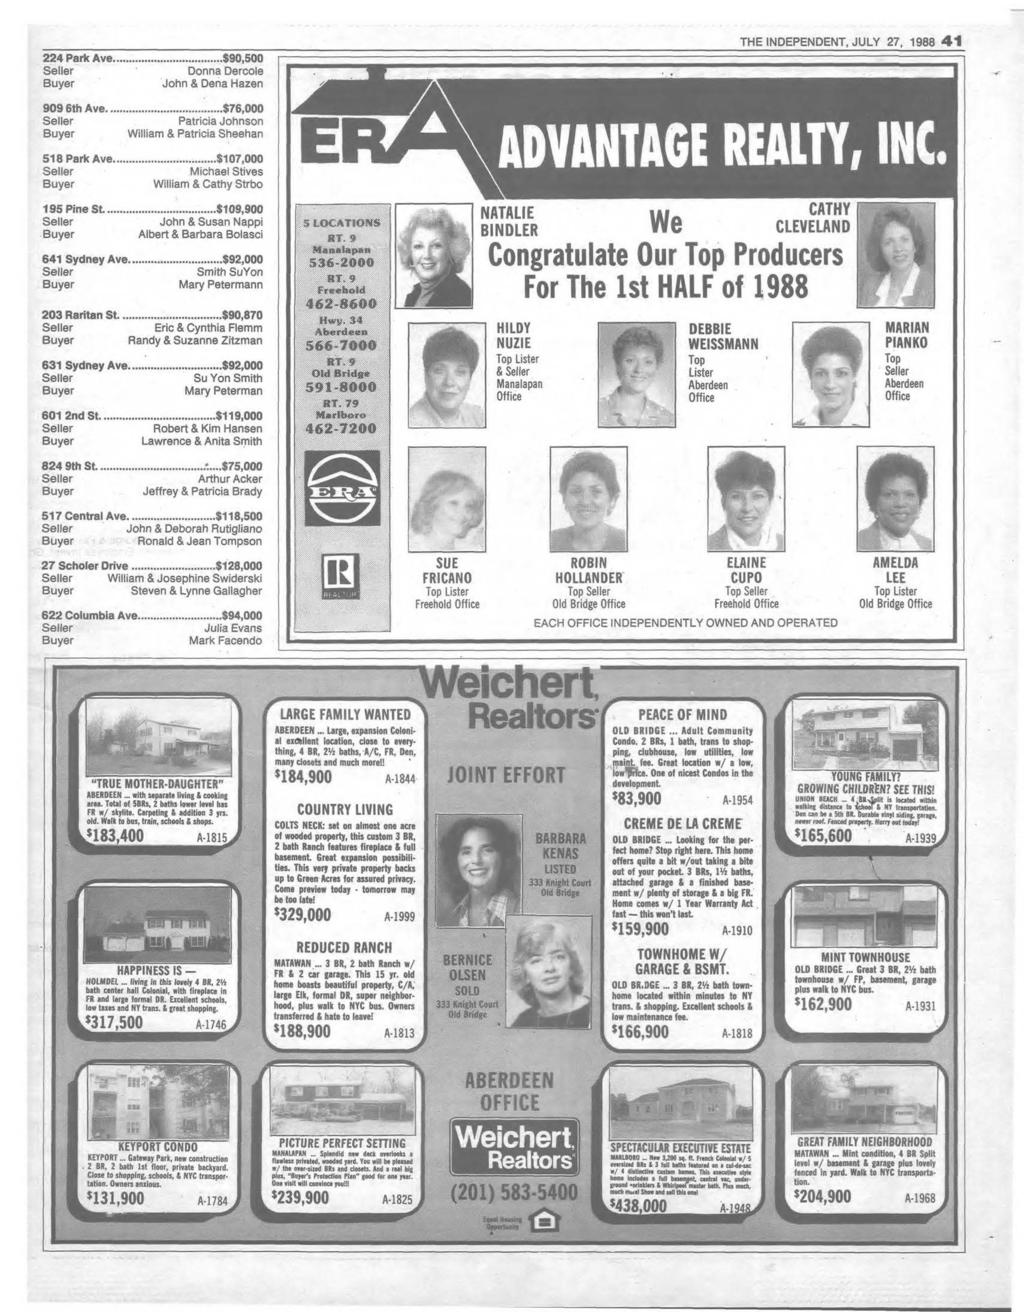 THE INDEPENDENT, JULY 27, 1988 4 1 224 Park Ave......$90,500 Donna Dercoie John & Dena Hazen 1 909 6th Ave...... $76,000 Patricia Johnson William & Patricia Sheehan 518 Park Ave.